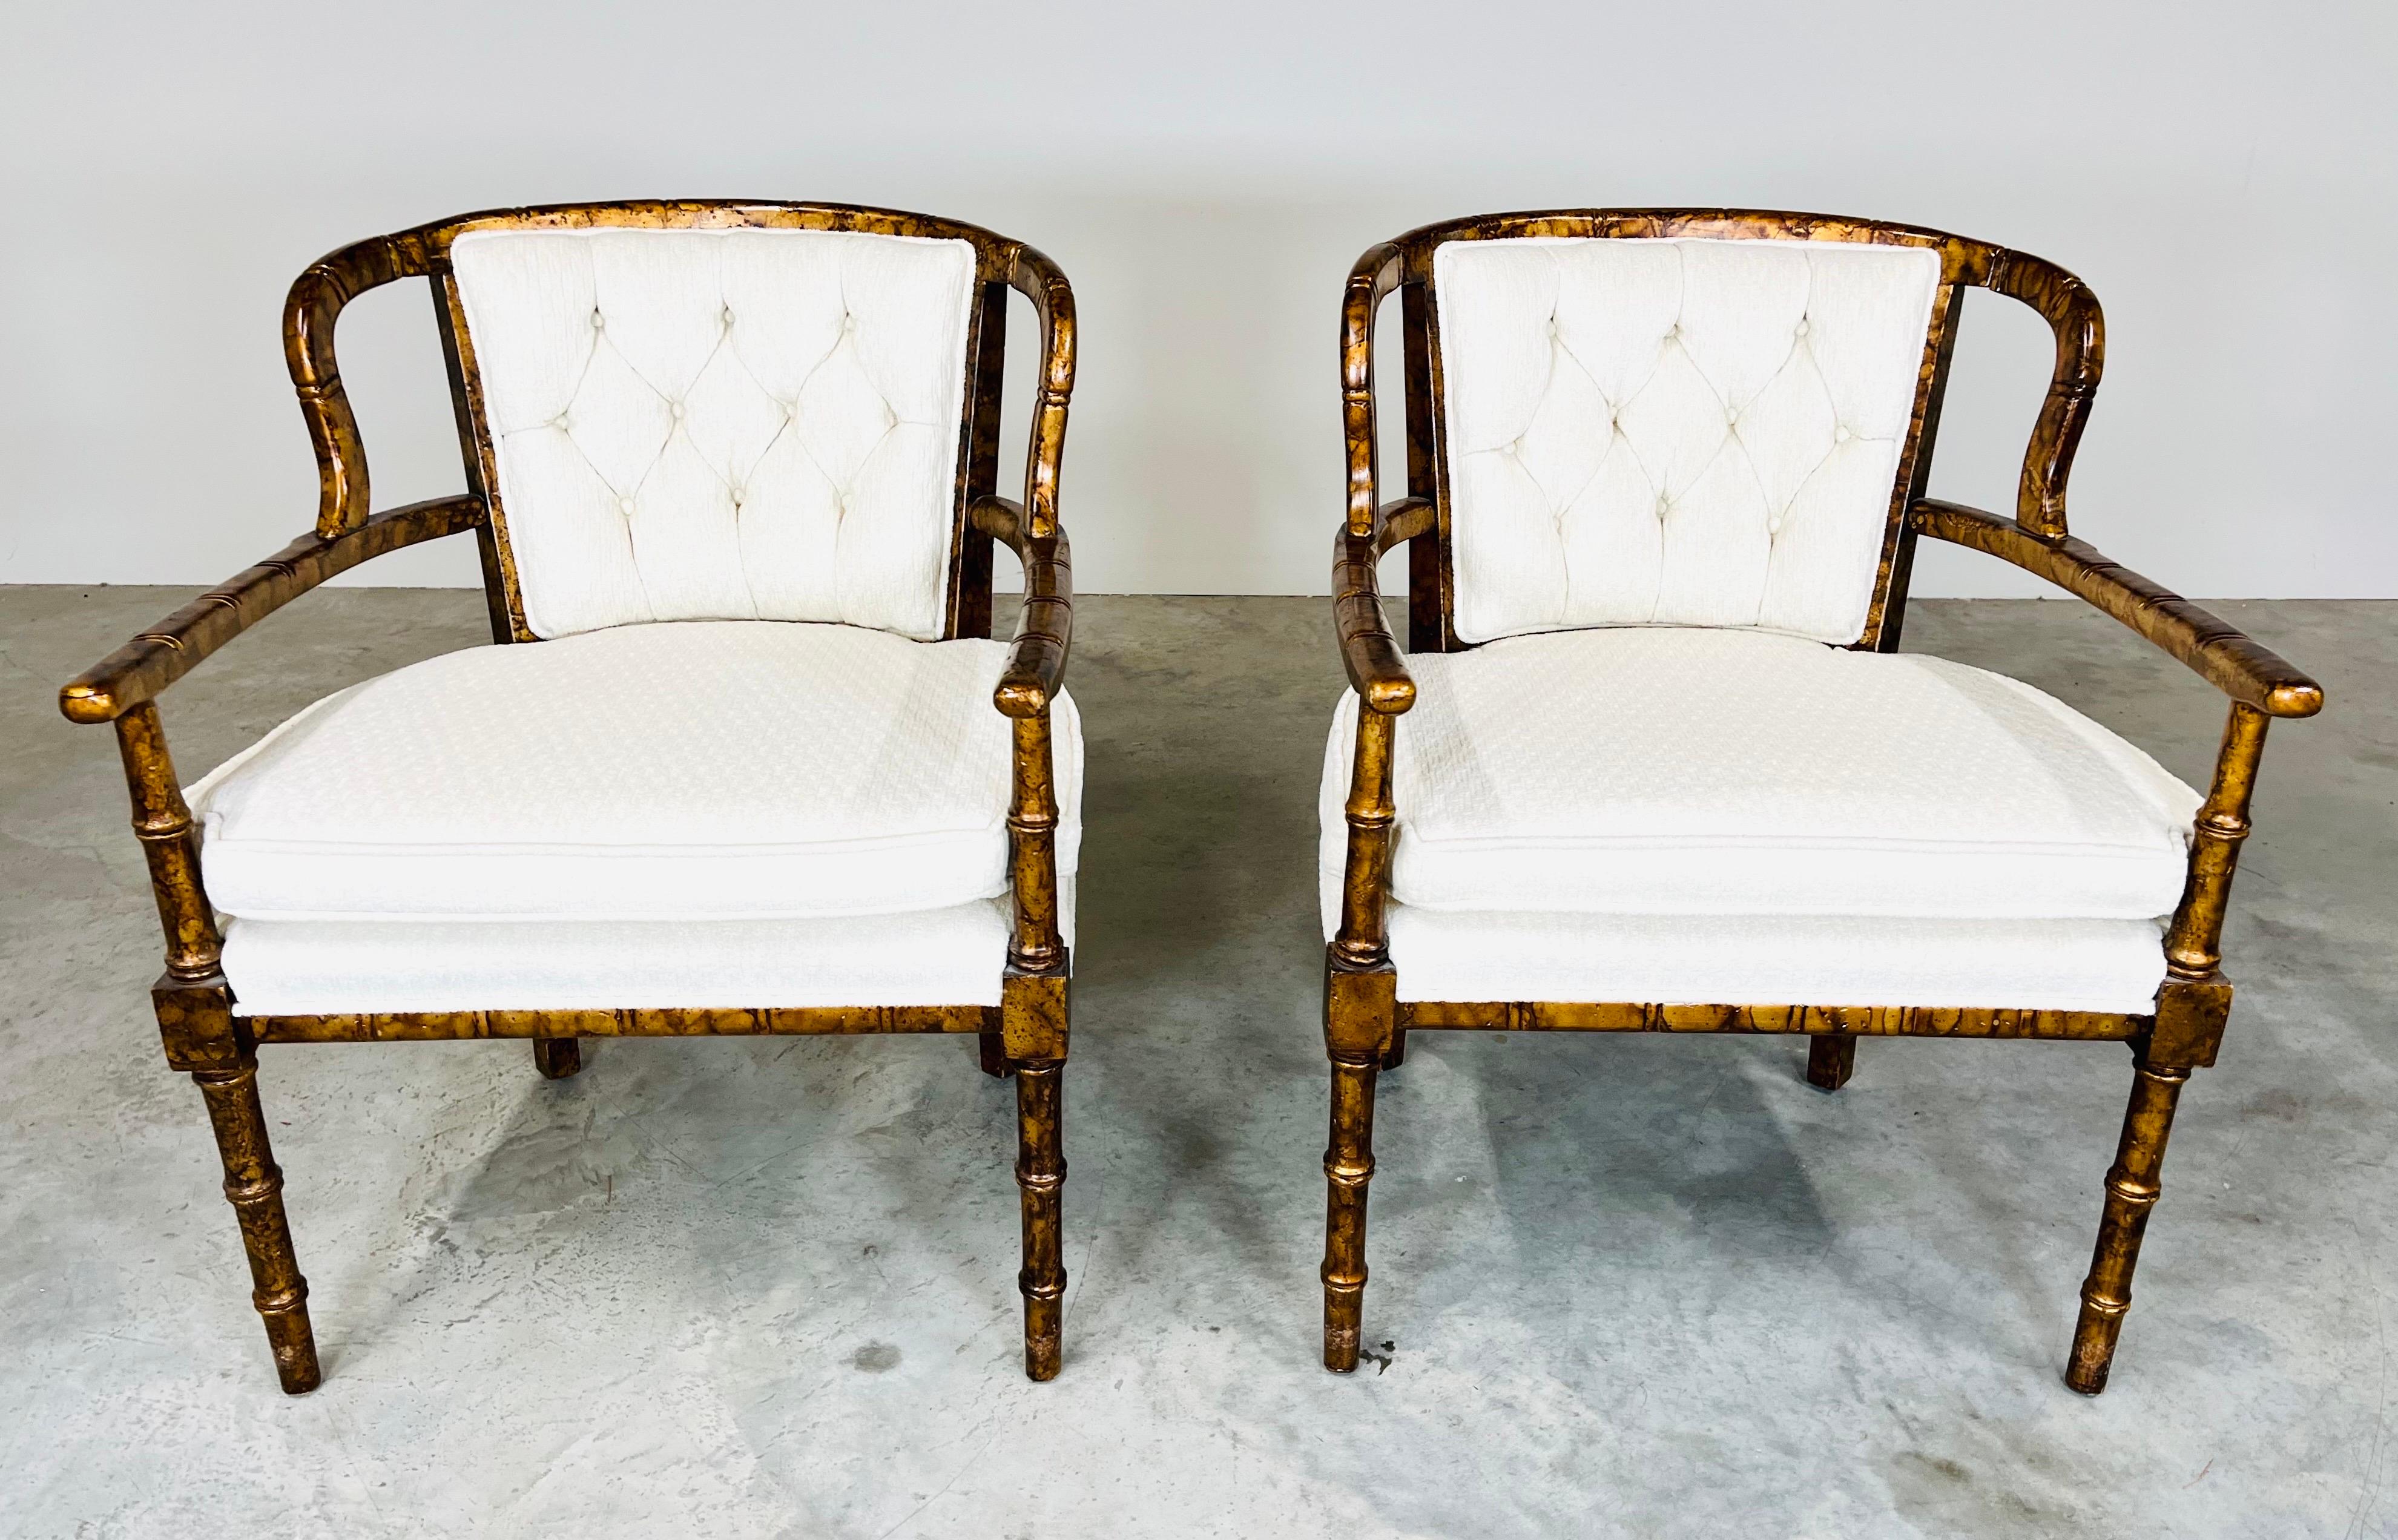 Faux bamboo with tortoise finish armchairs attributed to Henredon having loose notched carat cushions with button tufted backs, interesting open wings & arm design. 
In outstanding vintage condition having fresh plush cotton/poly upholstery with